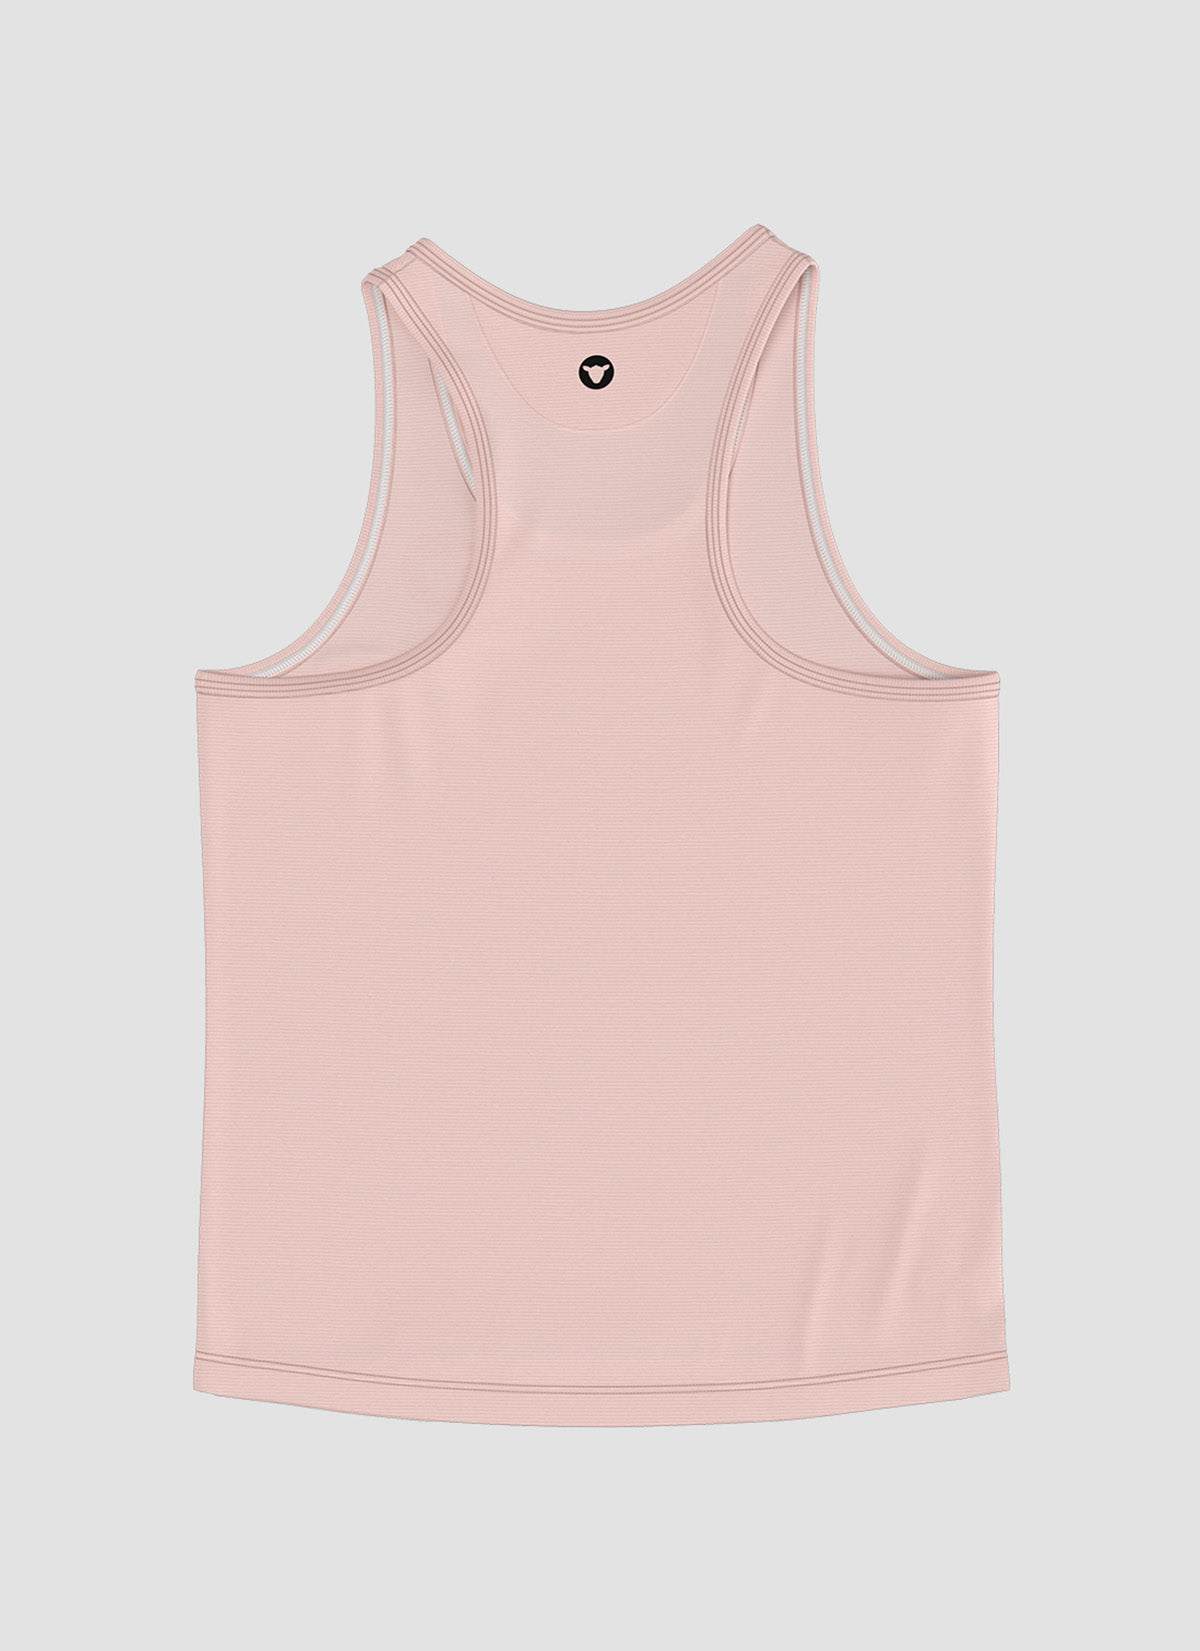 Women's Dry Singlet - Barely Pink